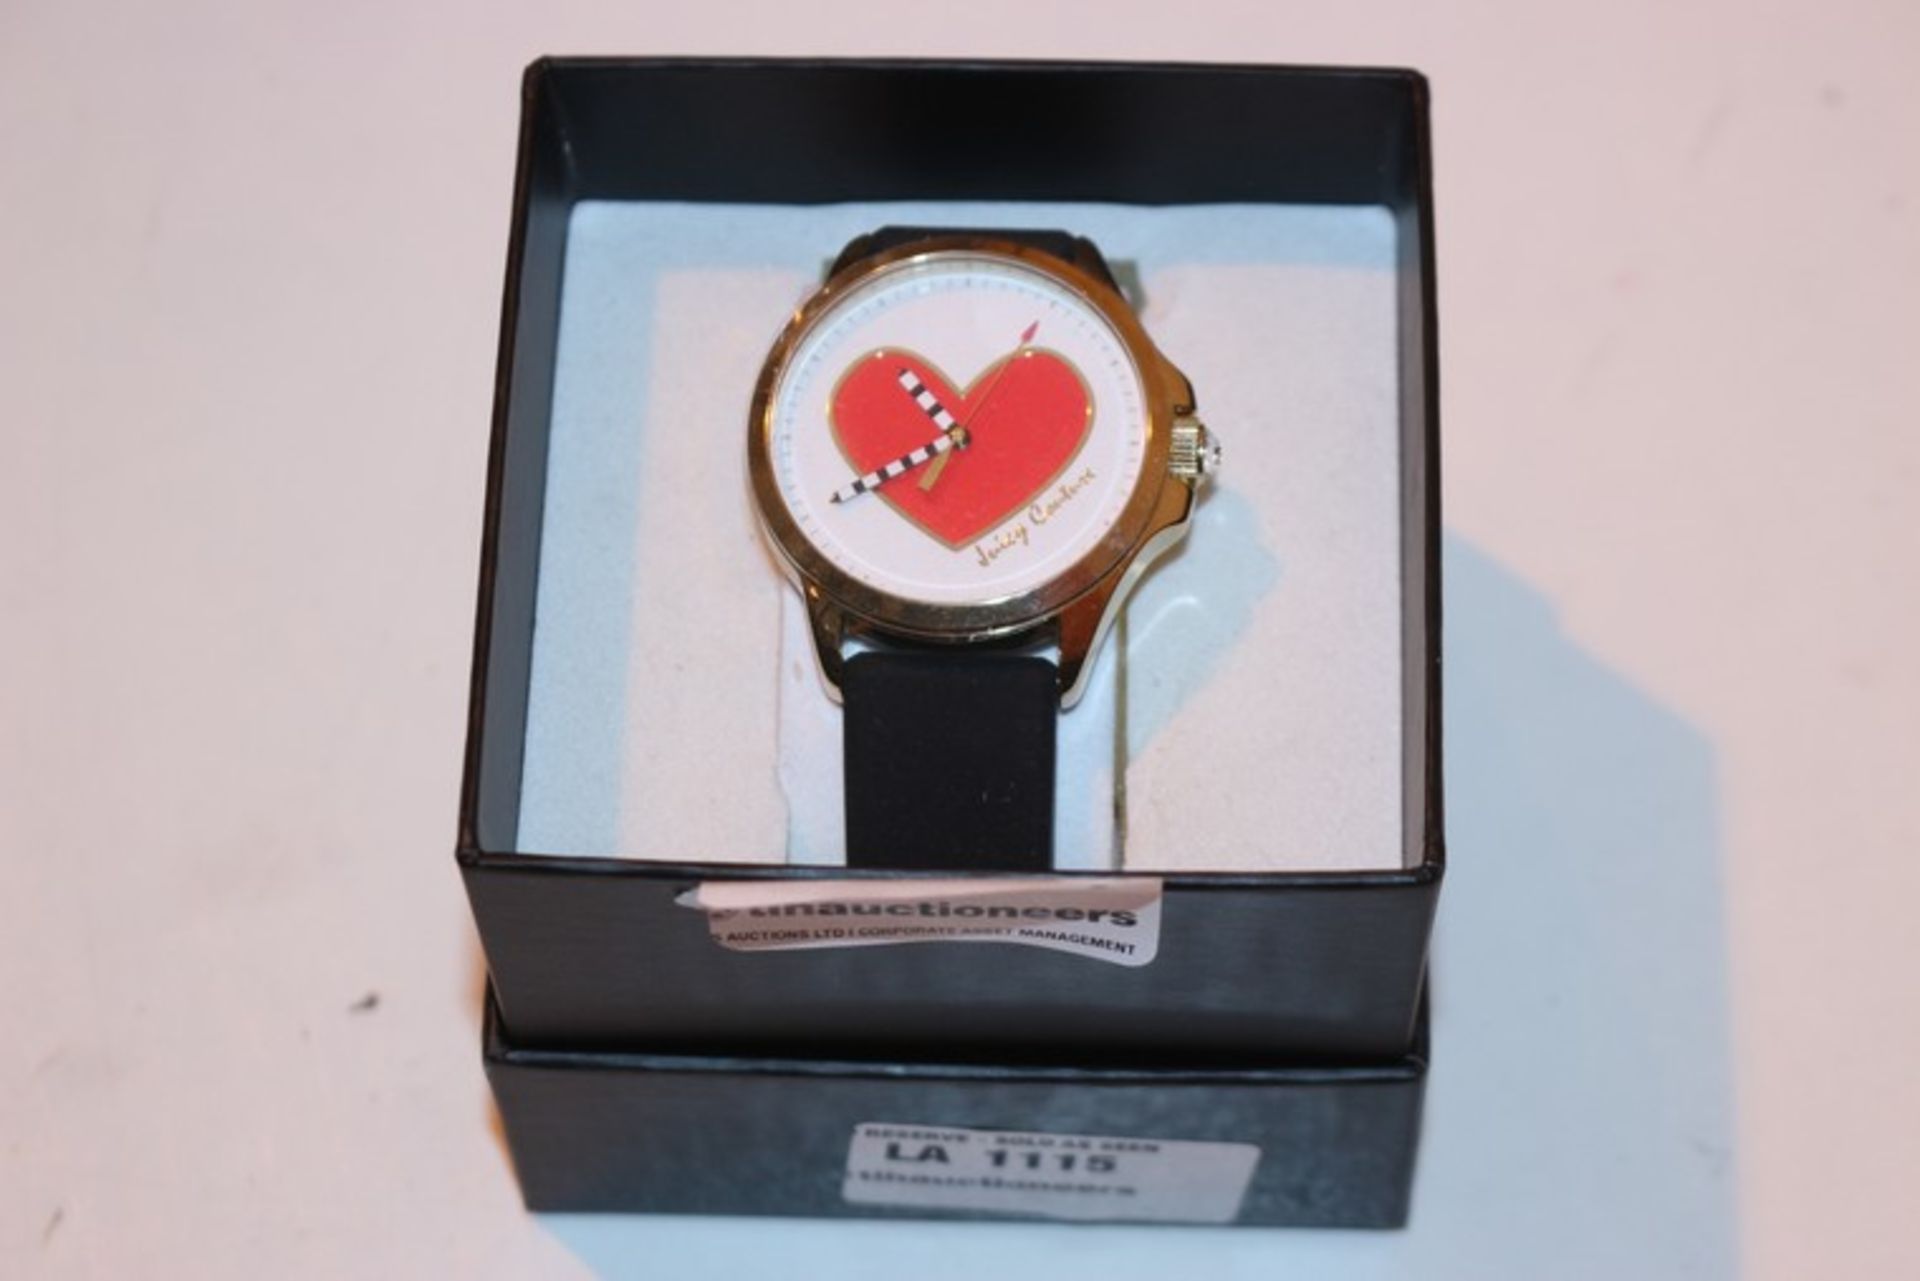 1 x BOXED BRAND NEW JUICY COUTURE DESIGNER WRIST WATCH *PLEASE NOTE THAT THE BID PRICE IS MULTIPLIED